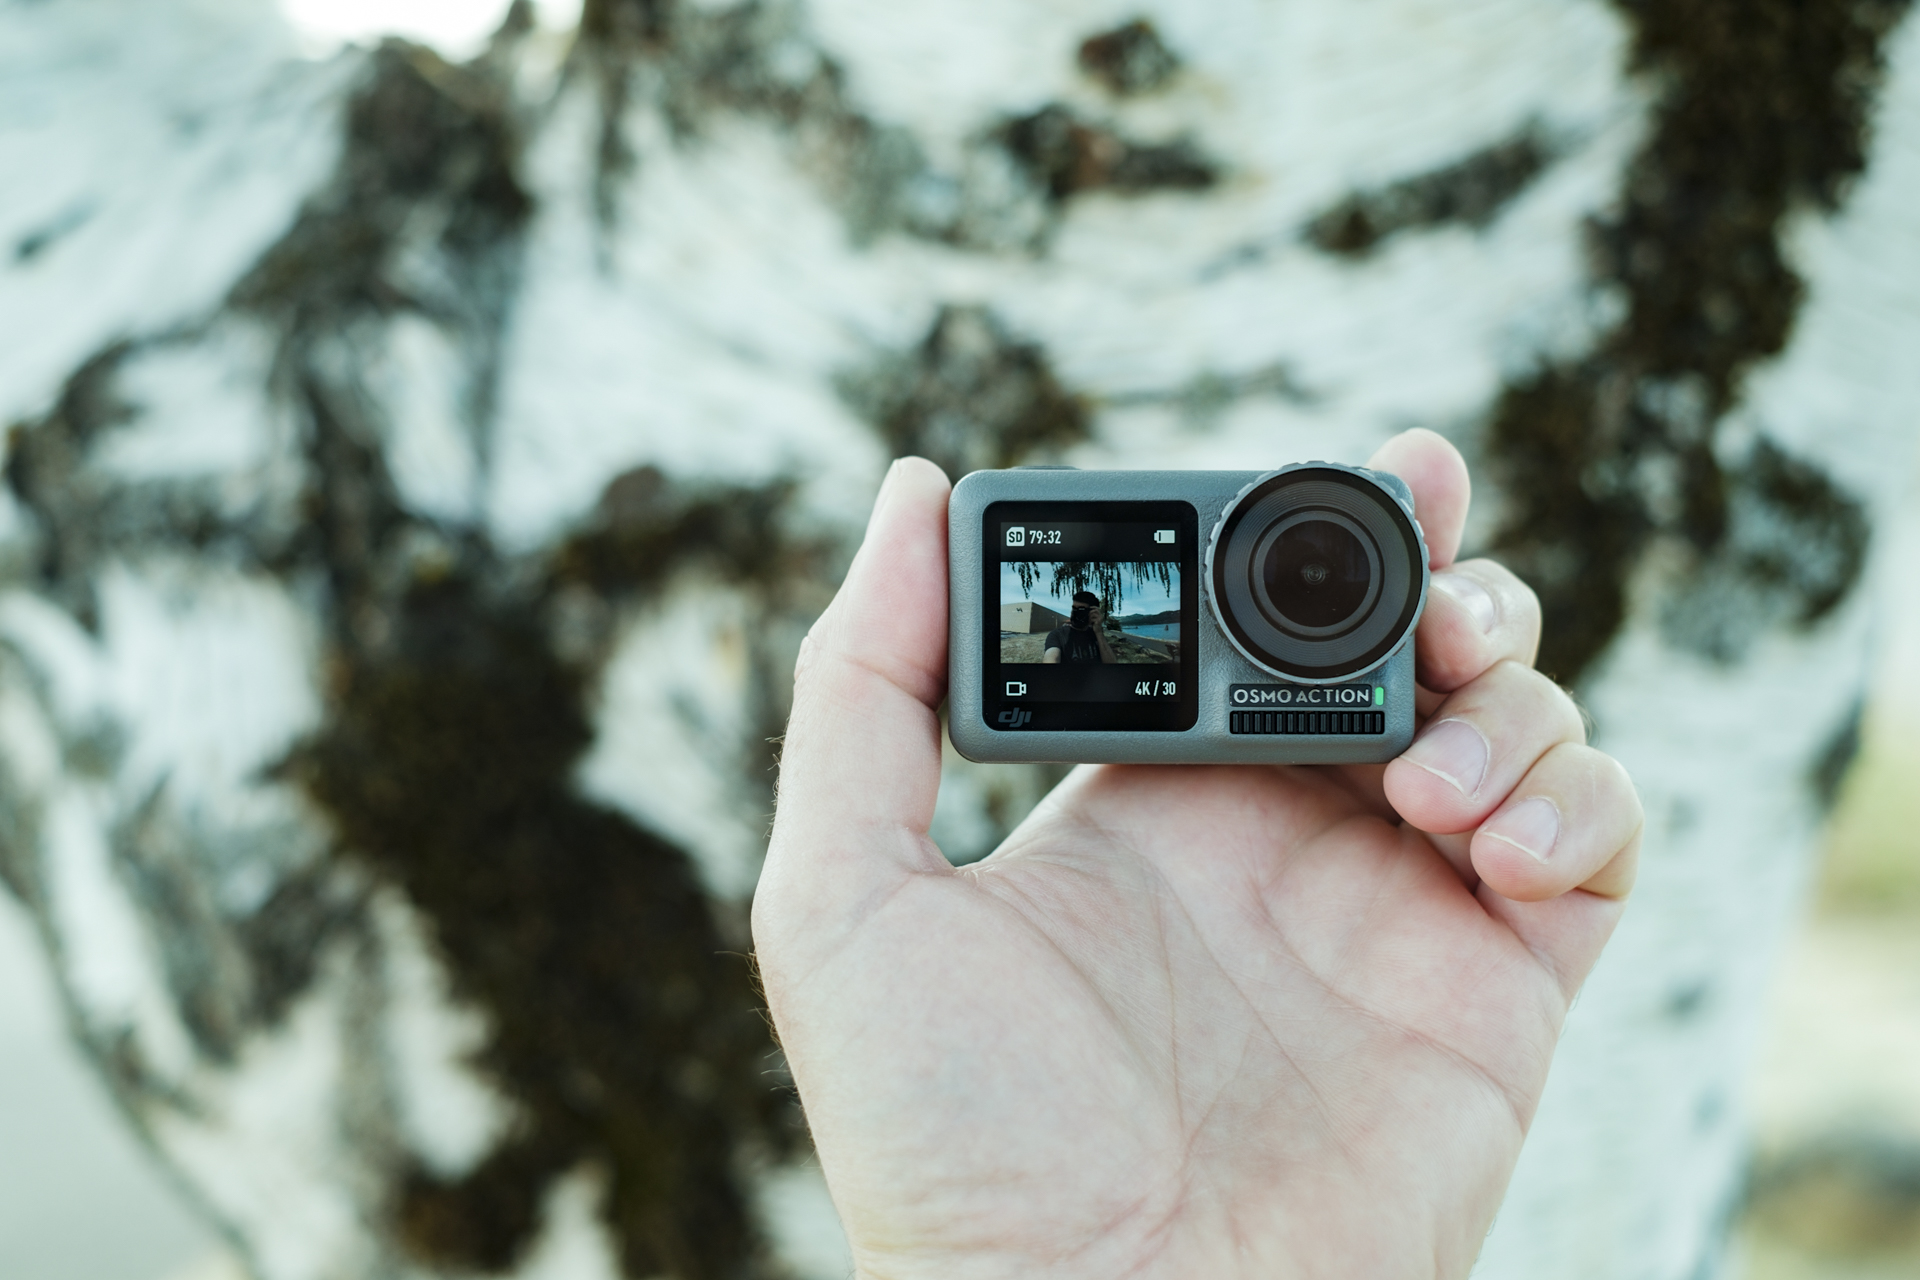 DJI Osmo Action 4 Review: Finally, a Worthy GoPro Competitor